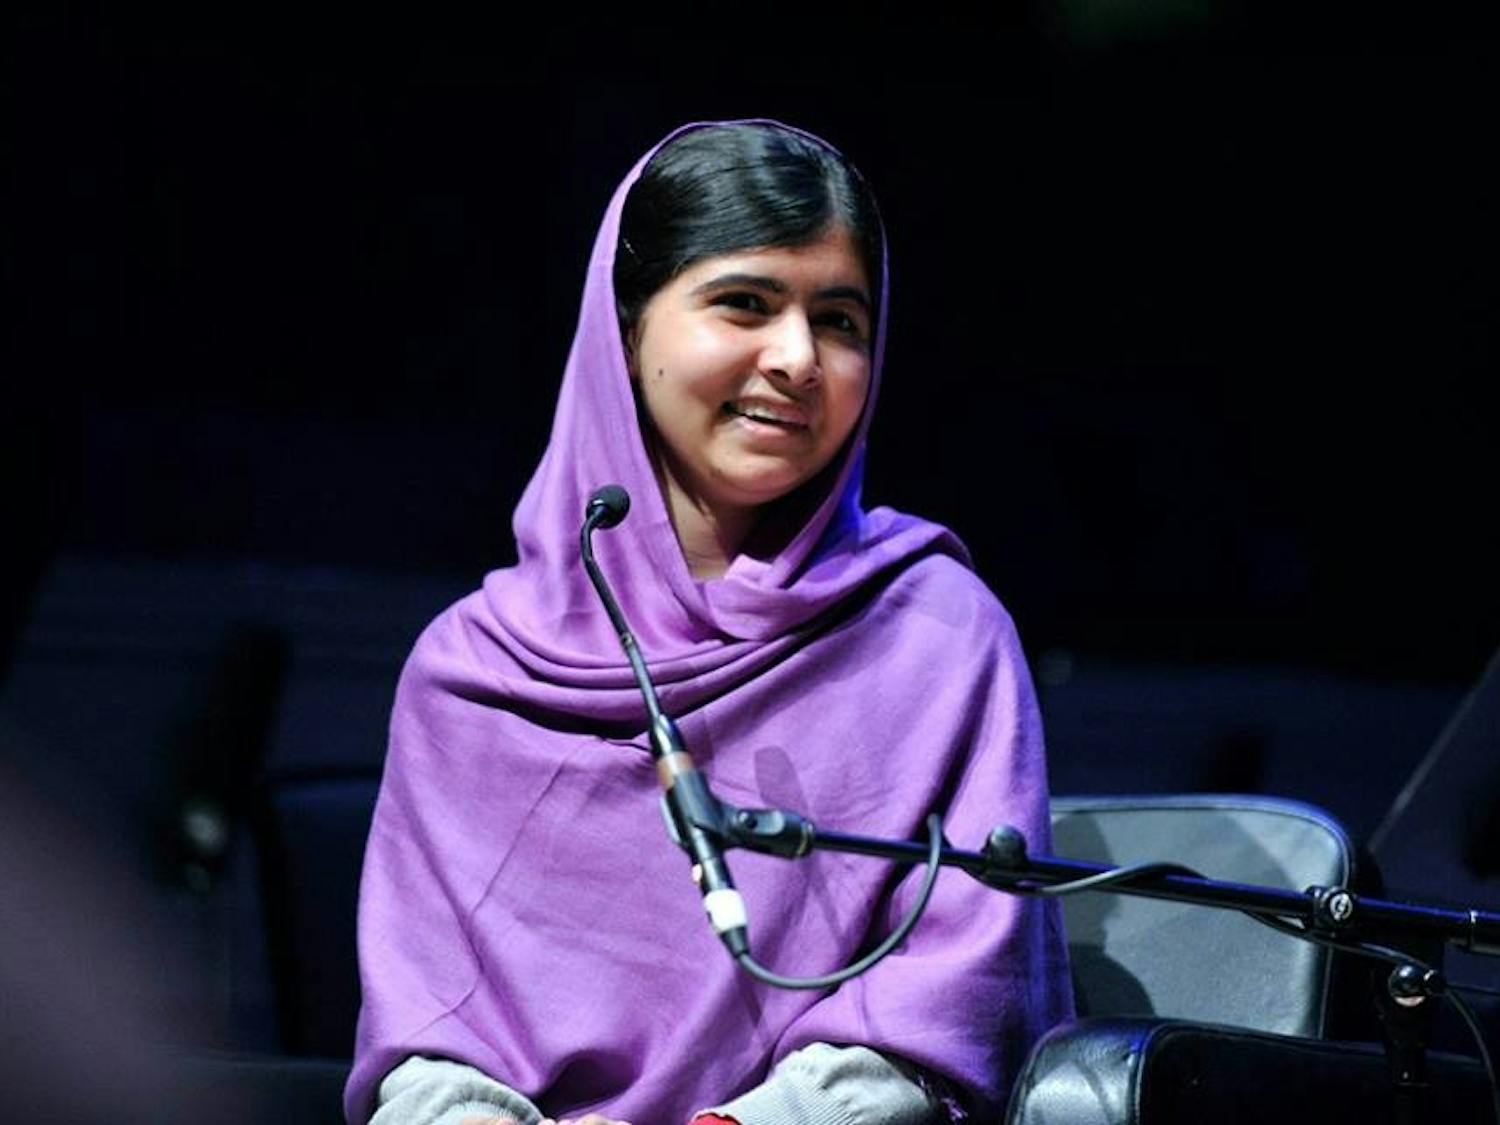 Malala Yousafzai will lead the 31st annual Distinguished Speakers Series at Alumni Arena on September 19.&nbsp;The 19-year-old Nobel Peace Prize winner is a women’s education activist in her home country of Pakistan.&nbsp;